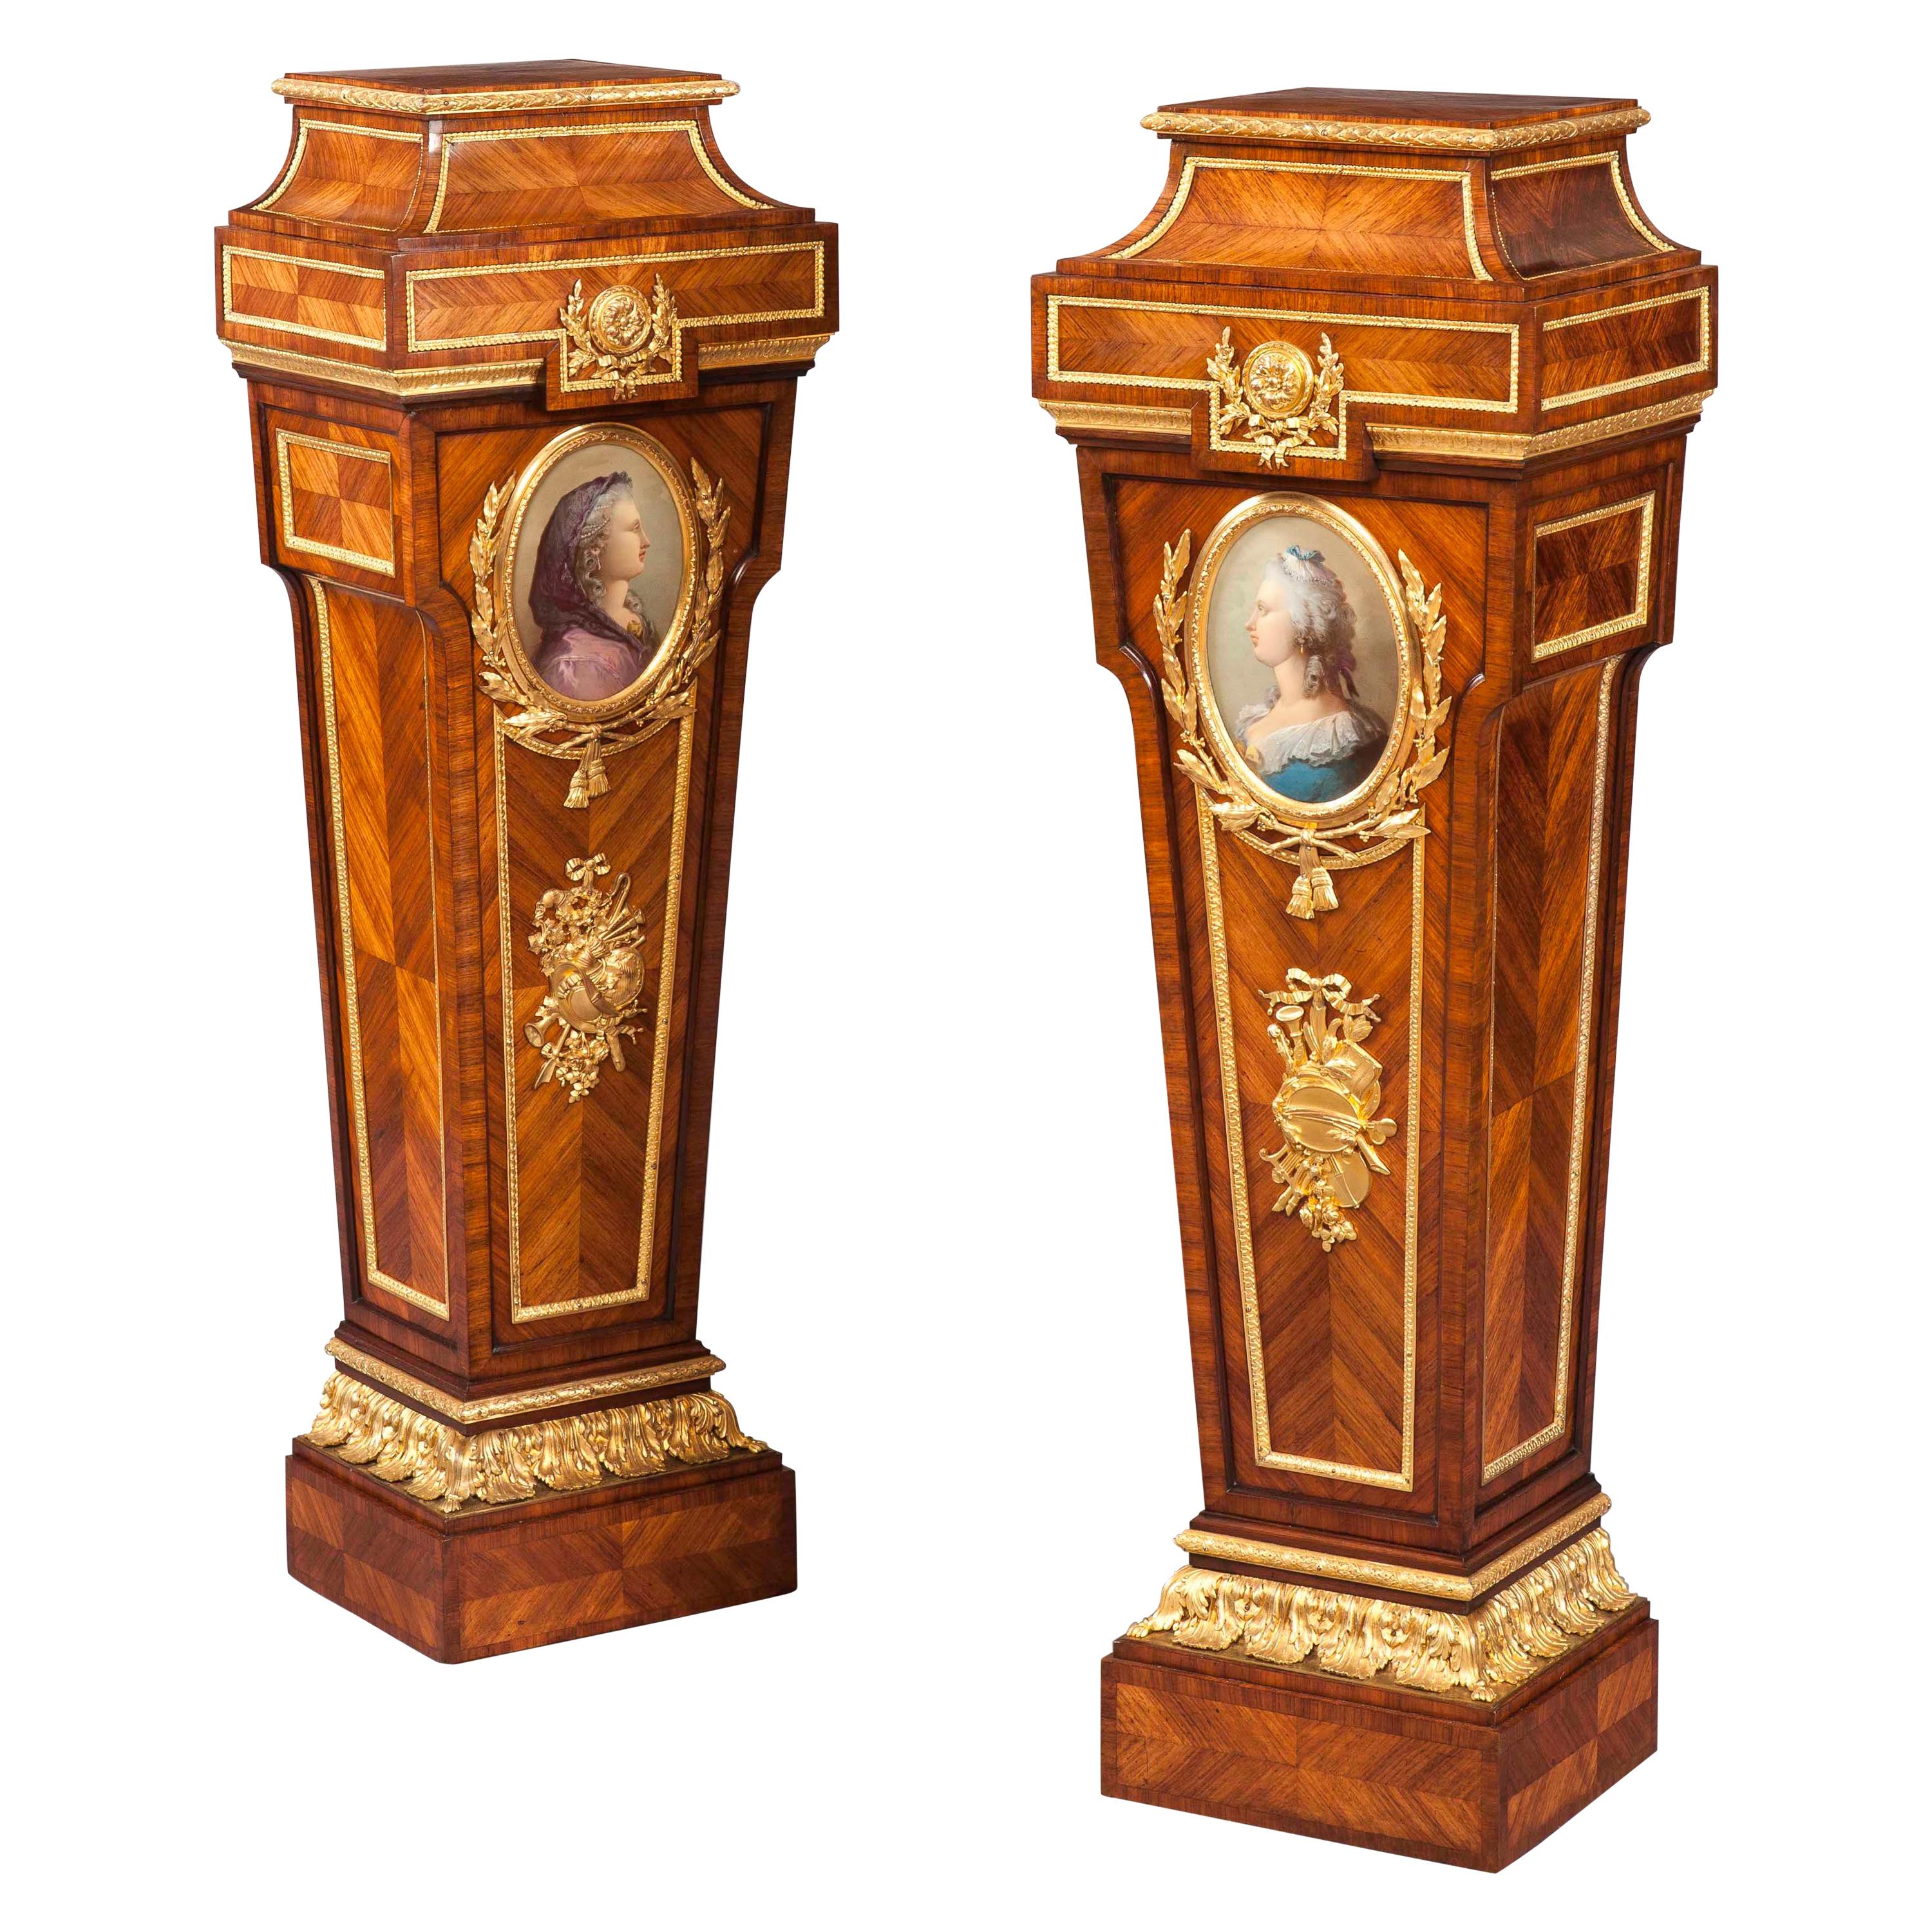 19th Century Pair of Kingwood Porcelain-Mounted Pedestals in the Louis XVI Style For Sale